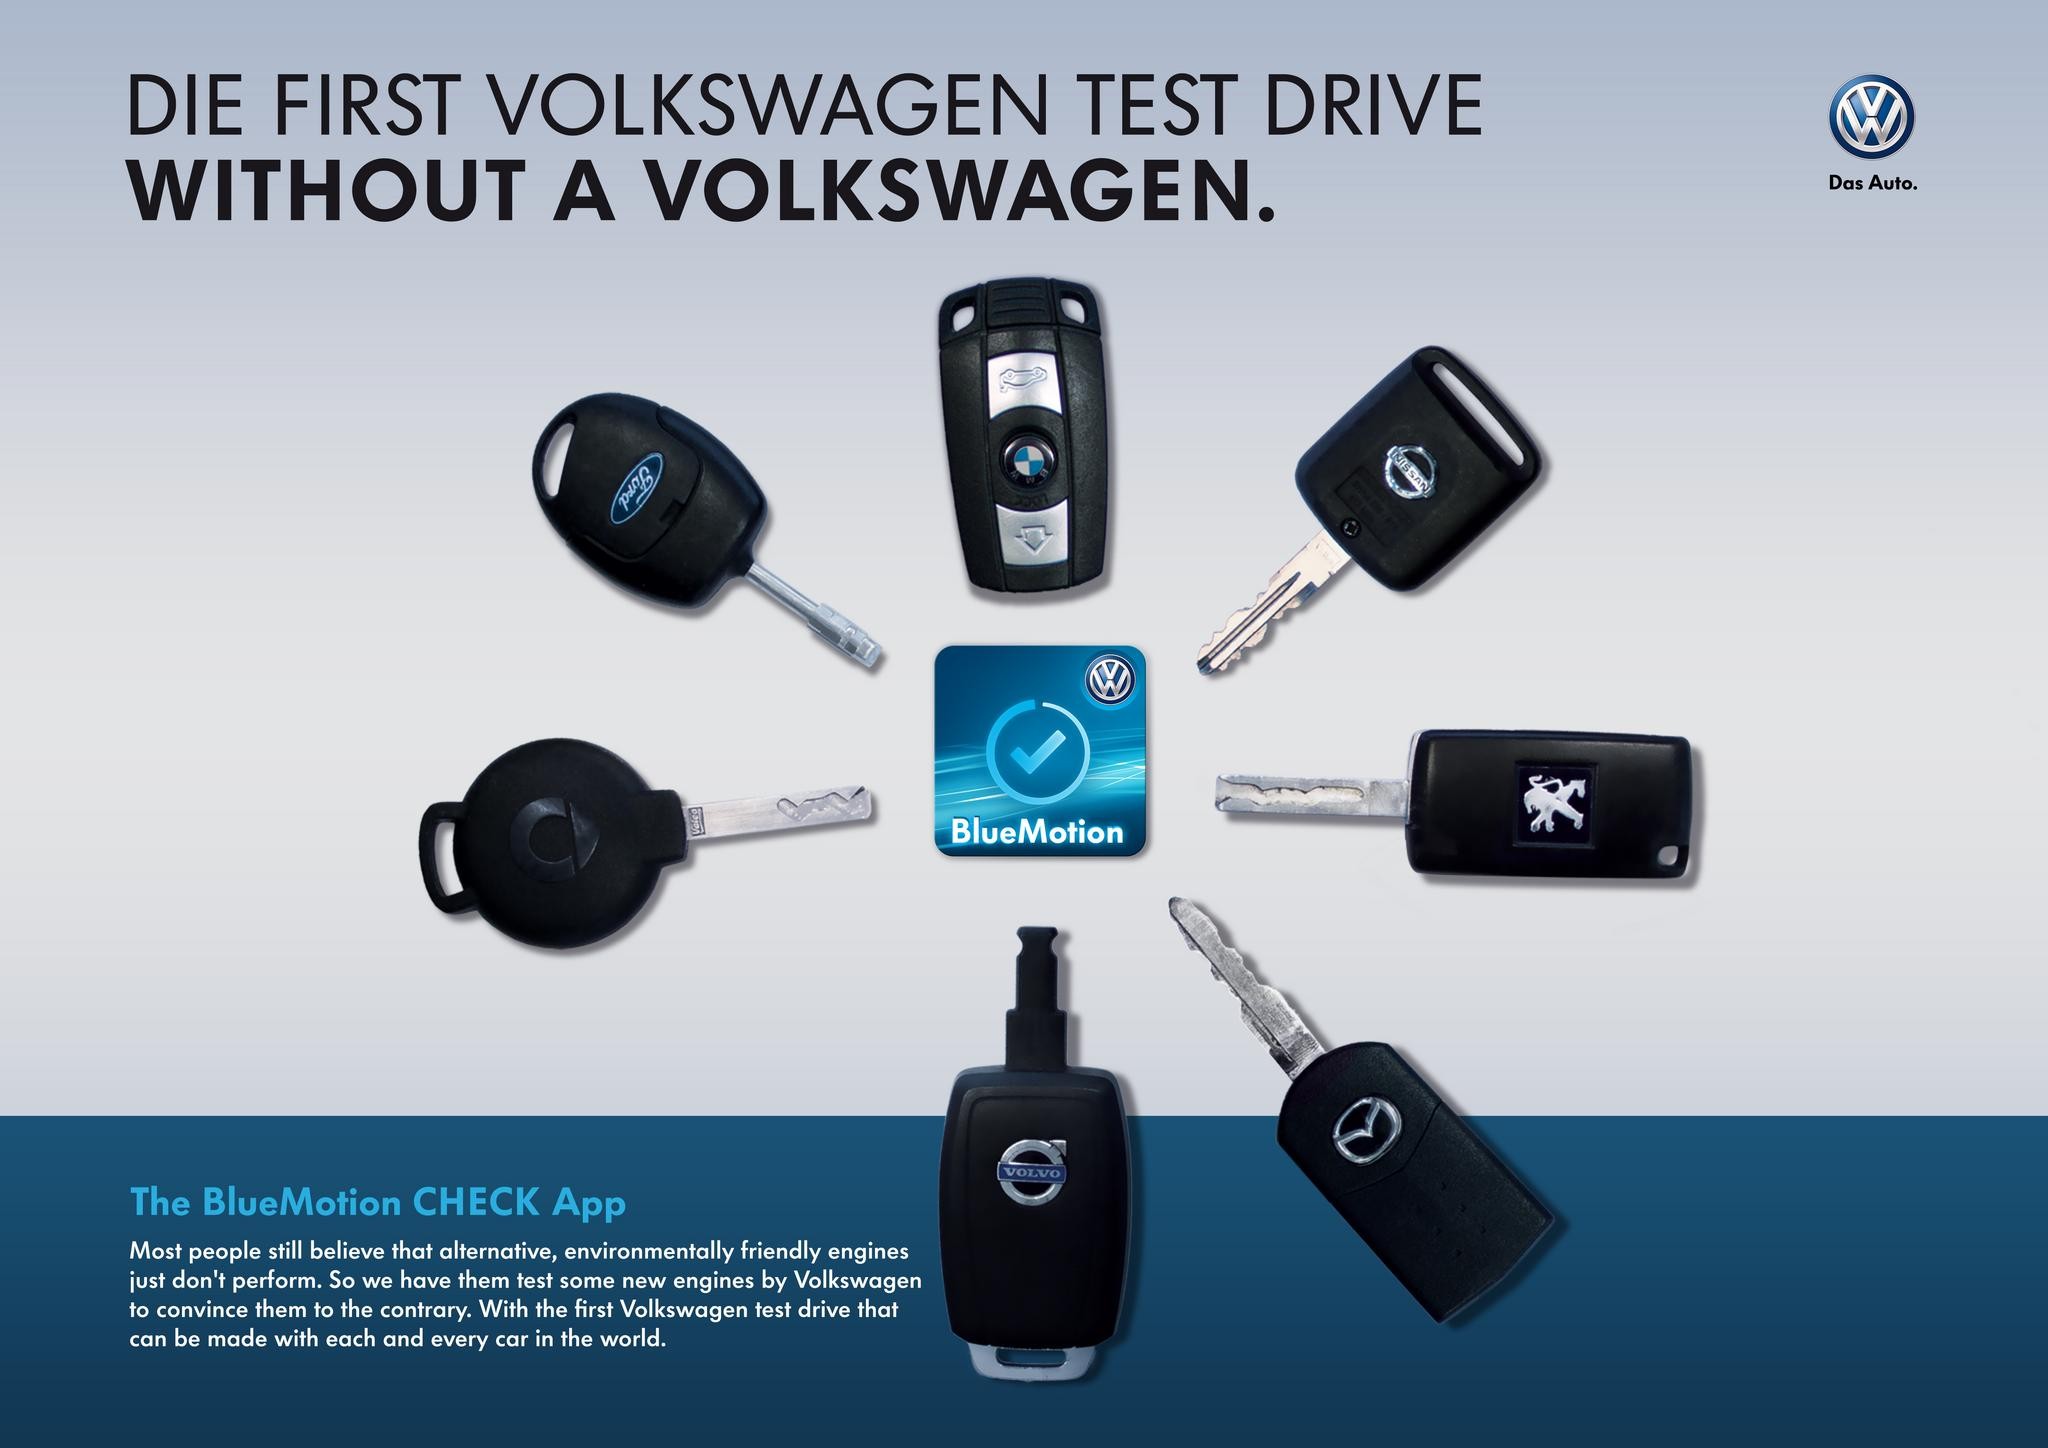 THE FIRST VOLKSWAGEN TEST DRIVE WITHOUT A VOLKSWAGEN.